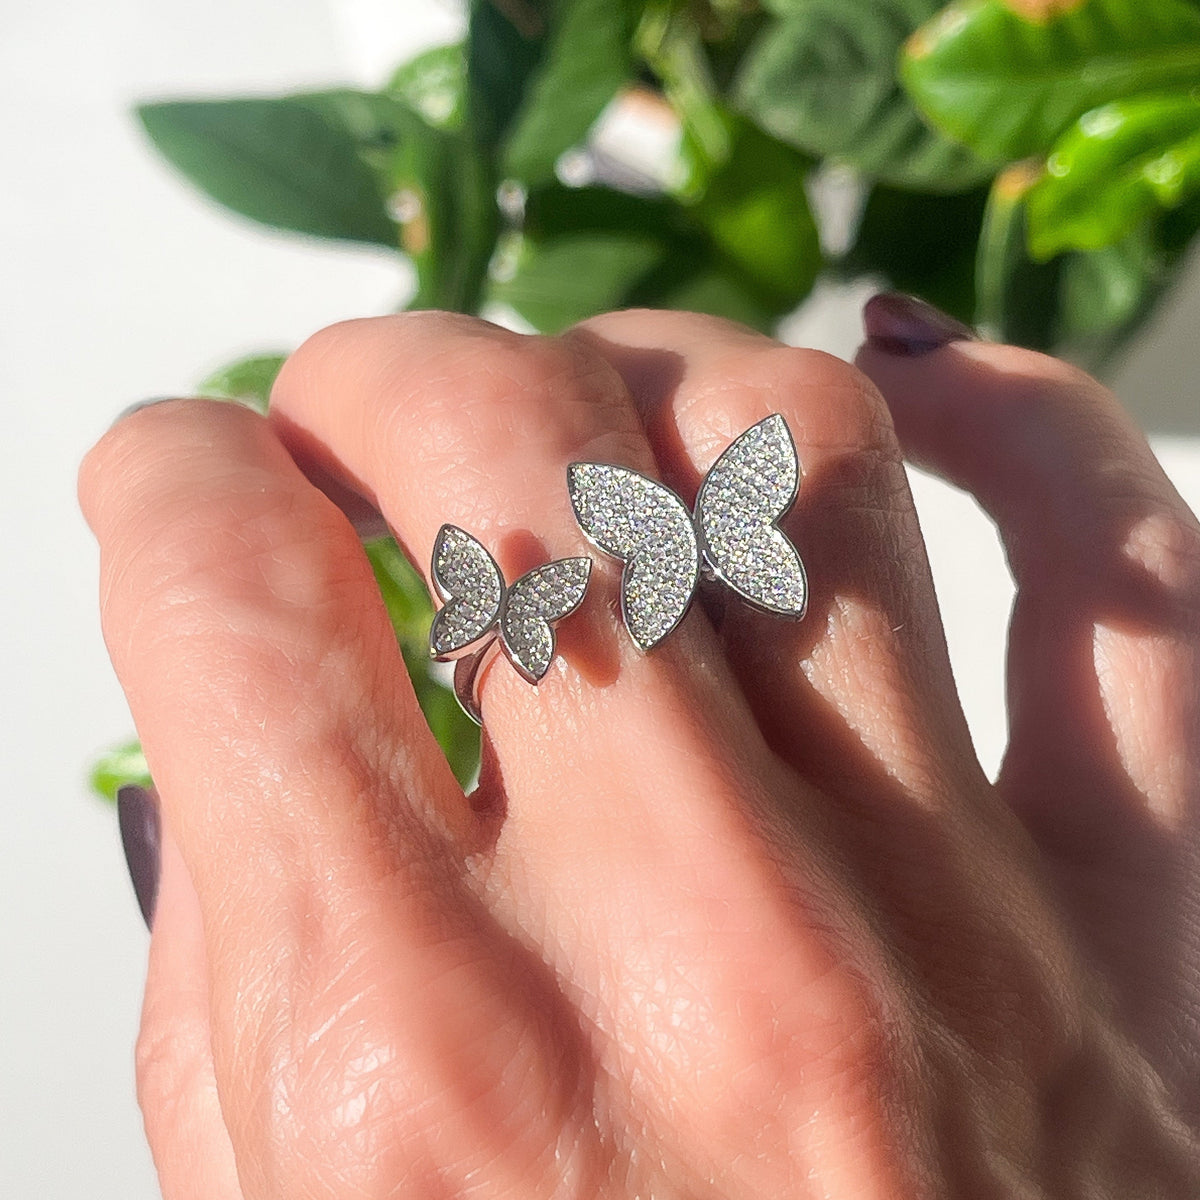 The Butterfly Ring